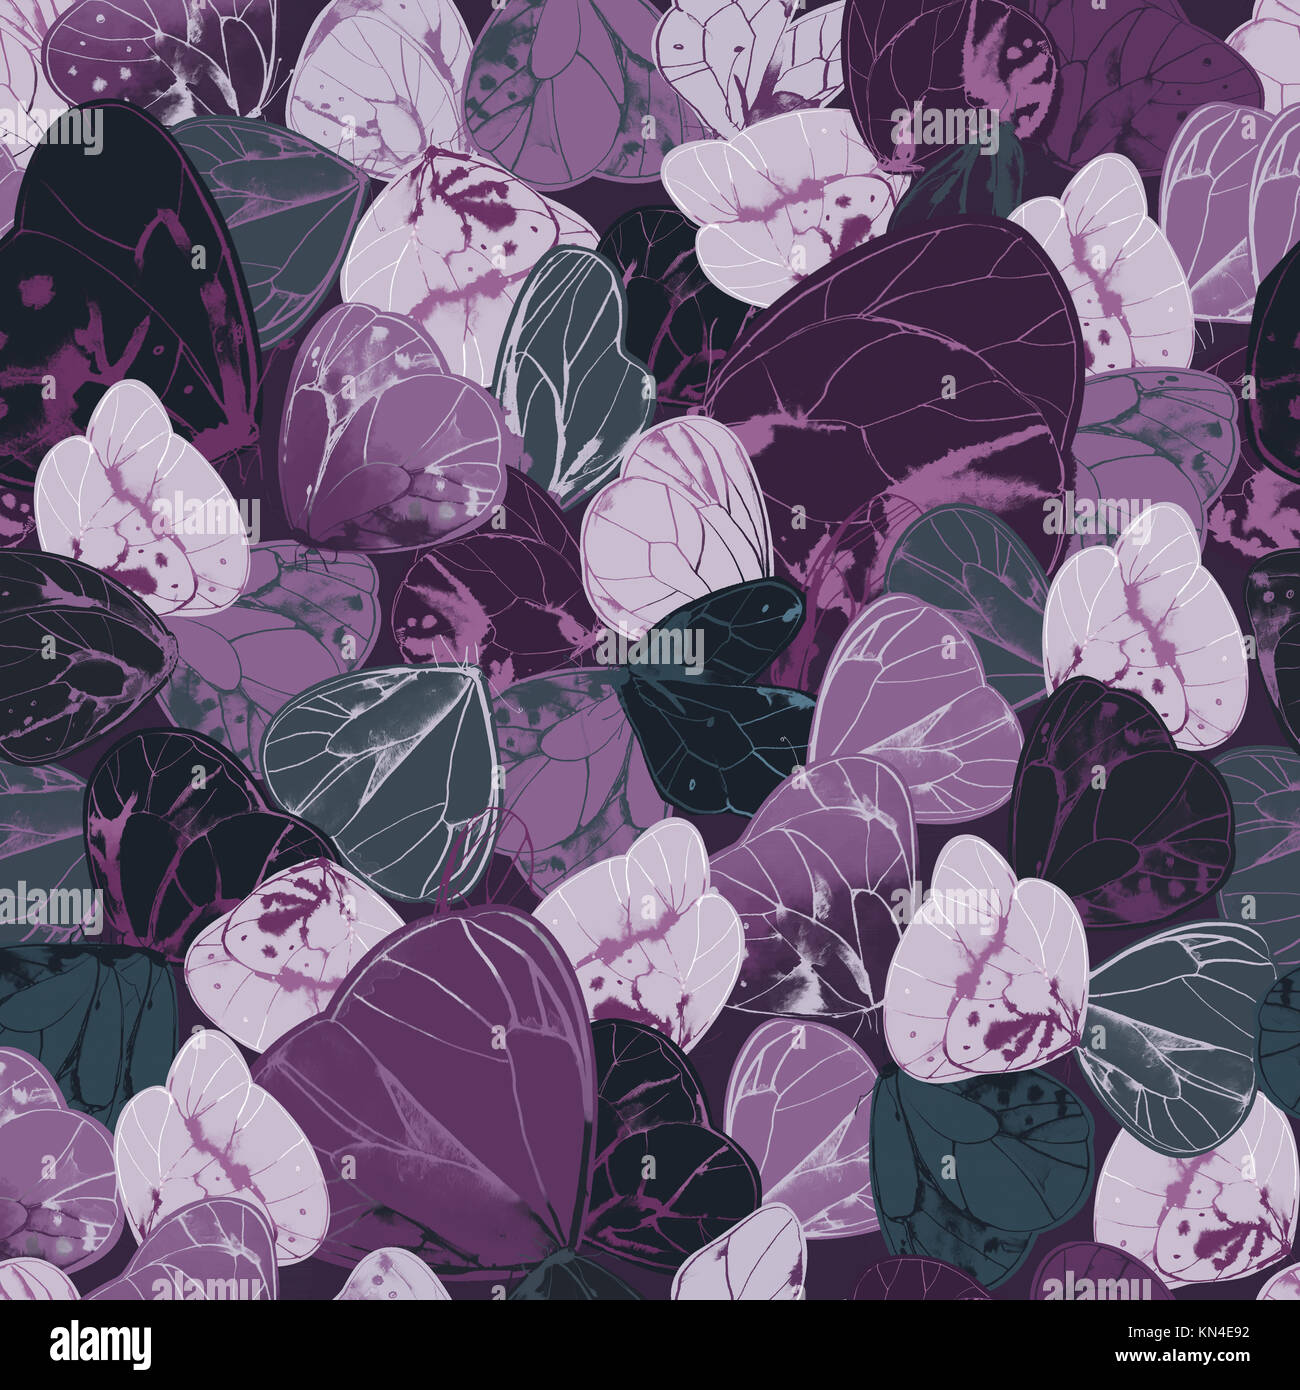 Natural seamless pattern with exotic butterflies or moths with purple and gray wings. Beautiful backdrop with lovely flying insects.  illustration for wrapping paper, wallpaper, fabric print. Stock Photo